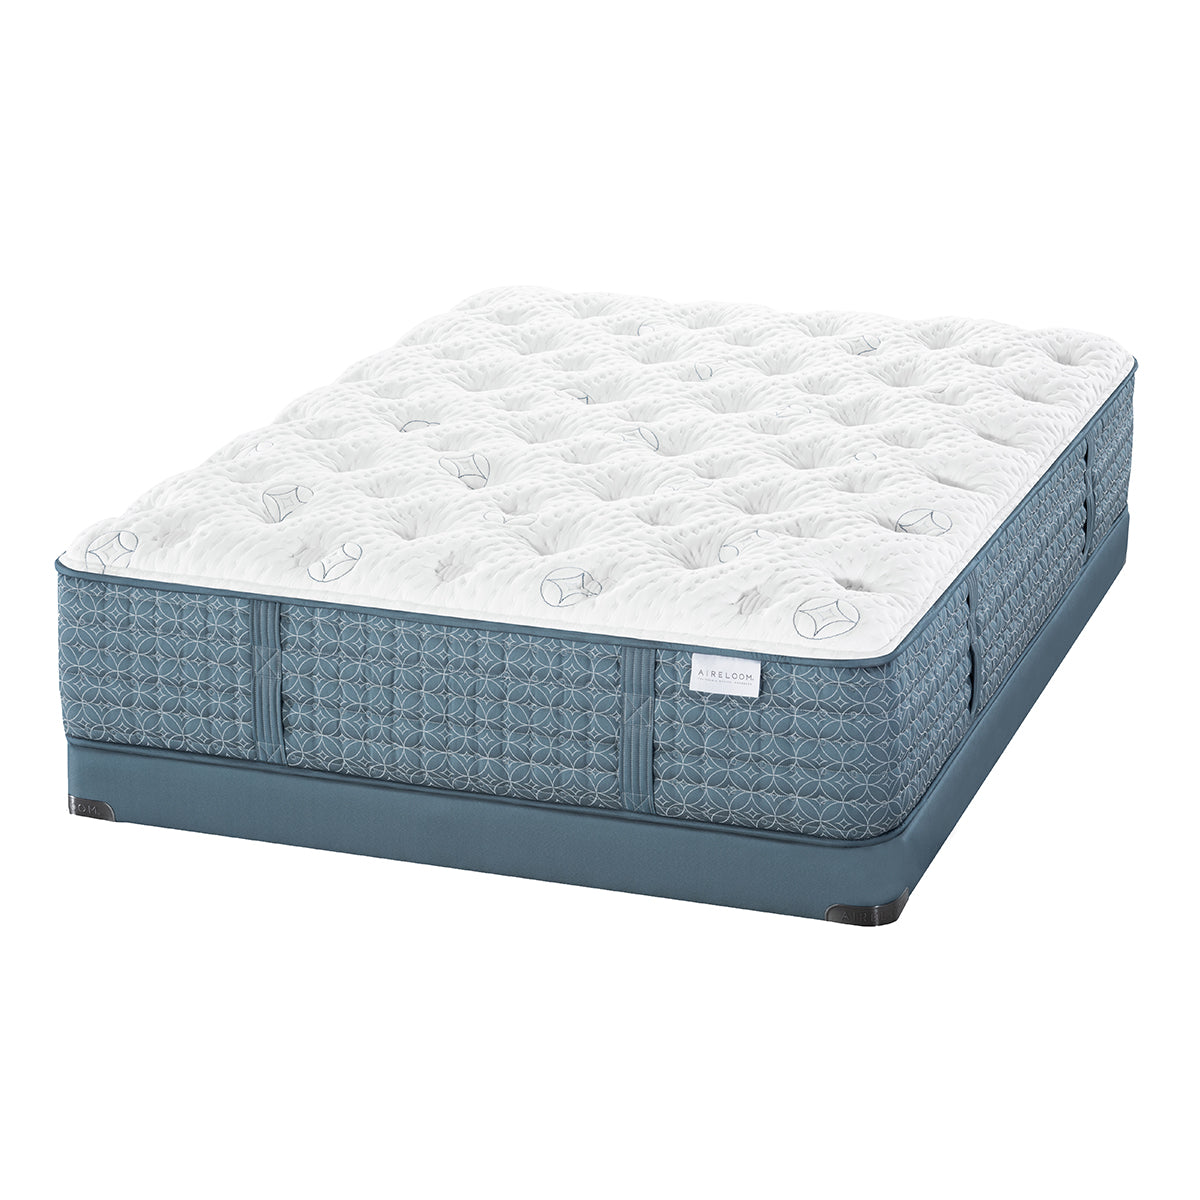 Aireloom Duet Luxury Firm Mattress On A Low Profile 5" Box Spring